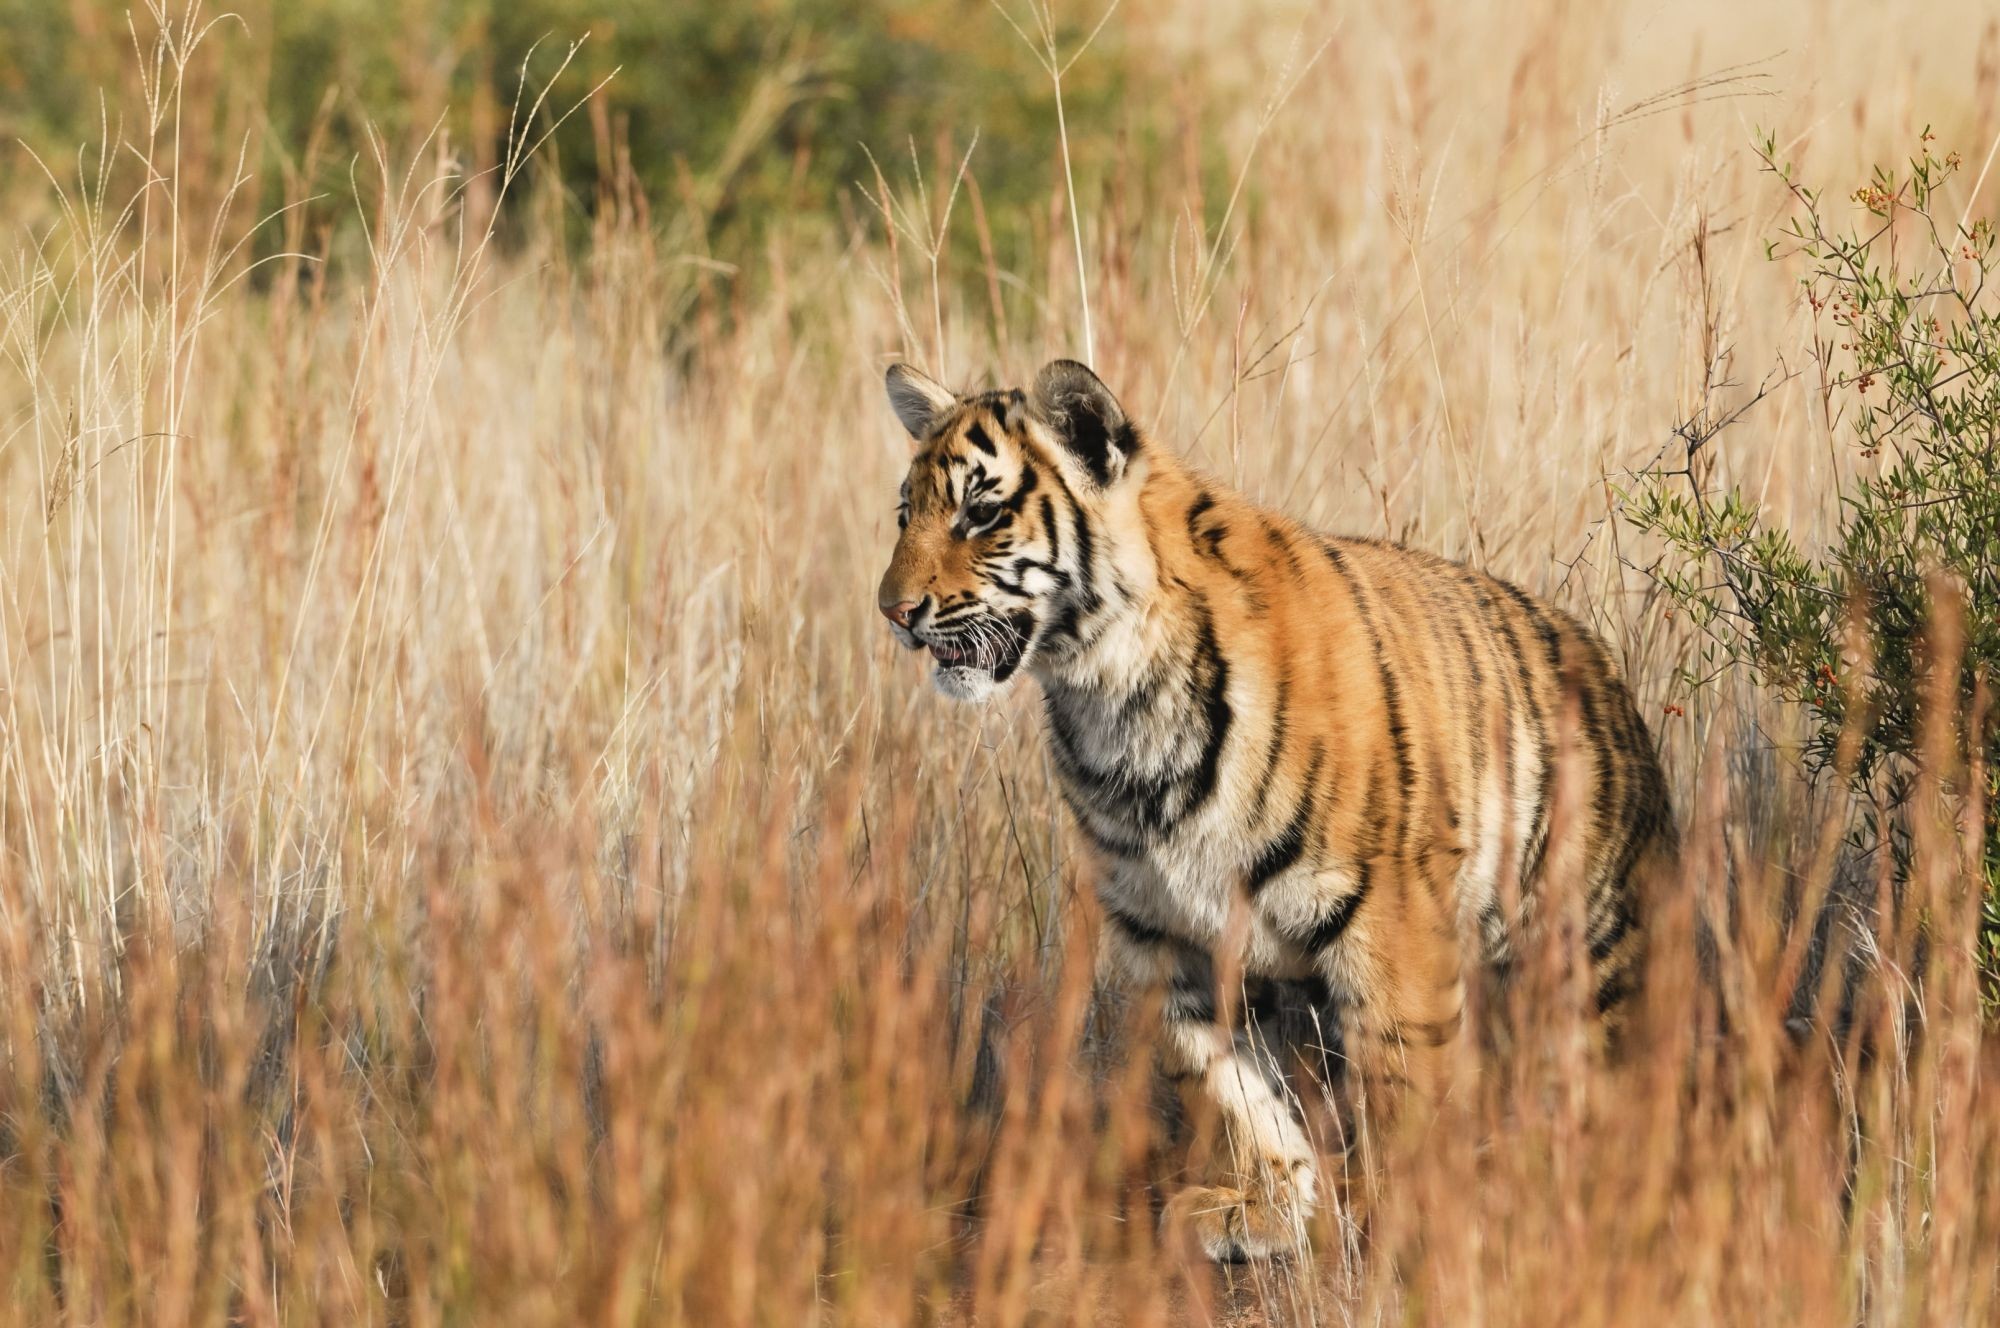 11 facts about tigers in the wild and in captivity